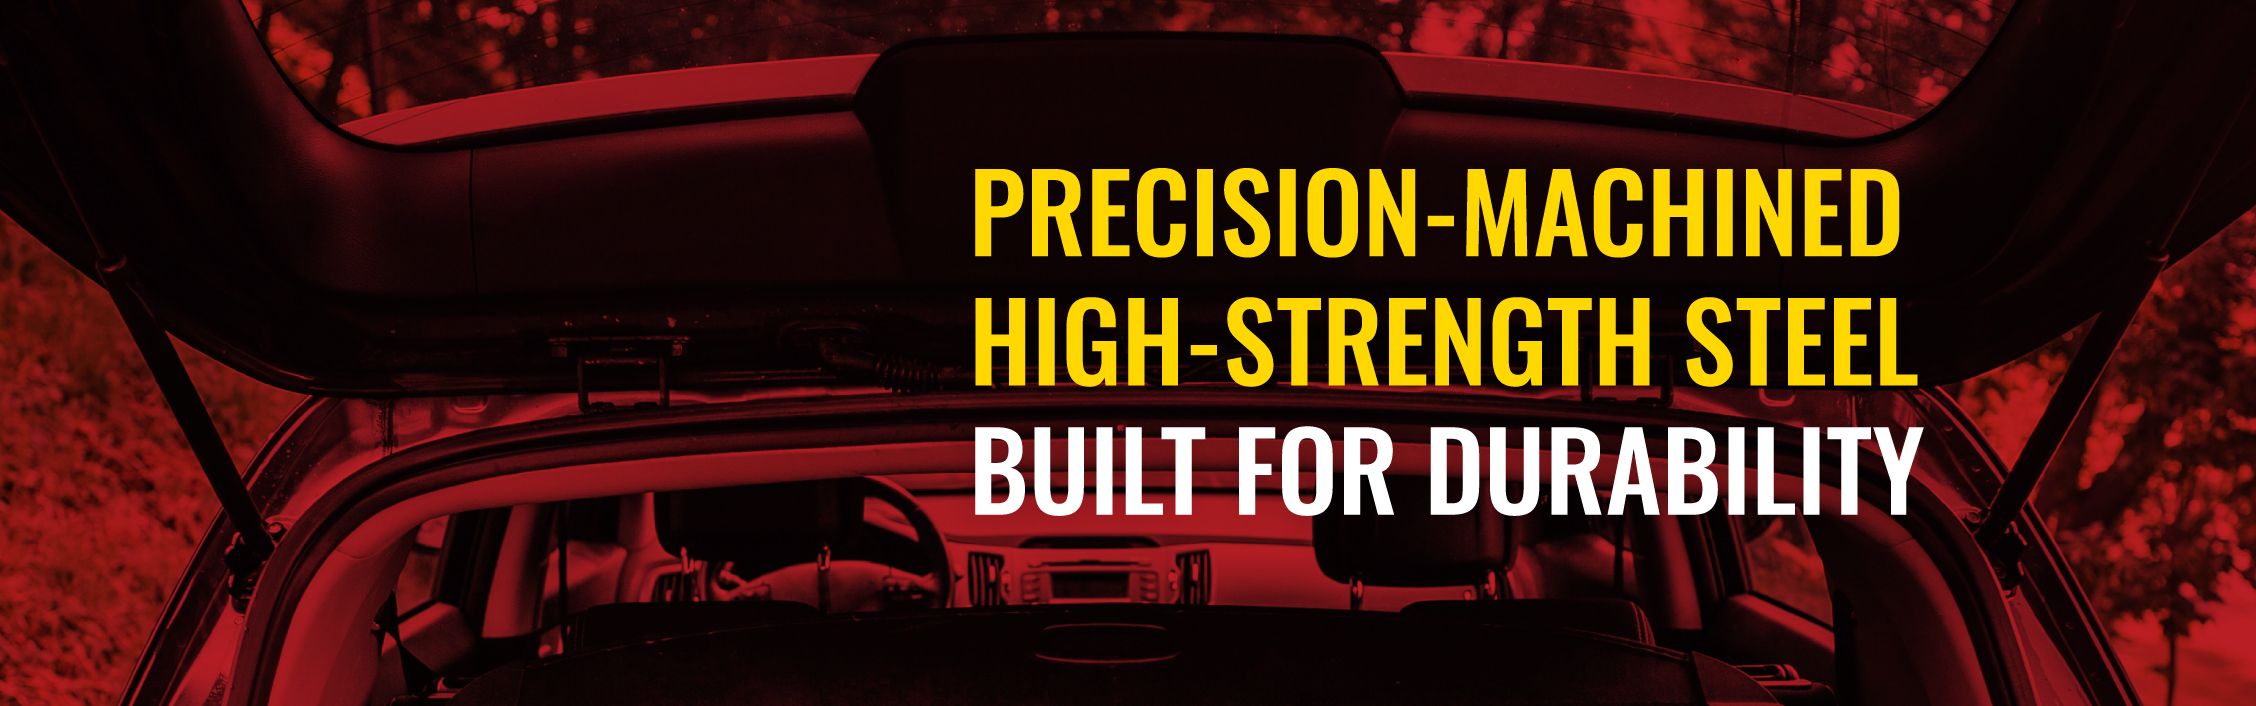 precision-machined high-strength steel built for durability